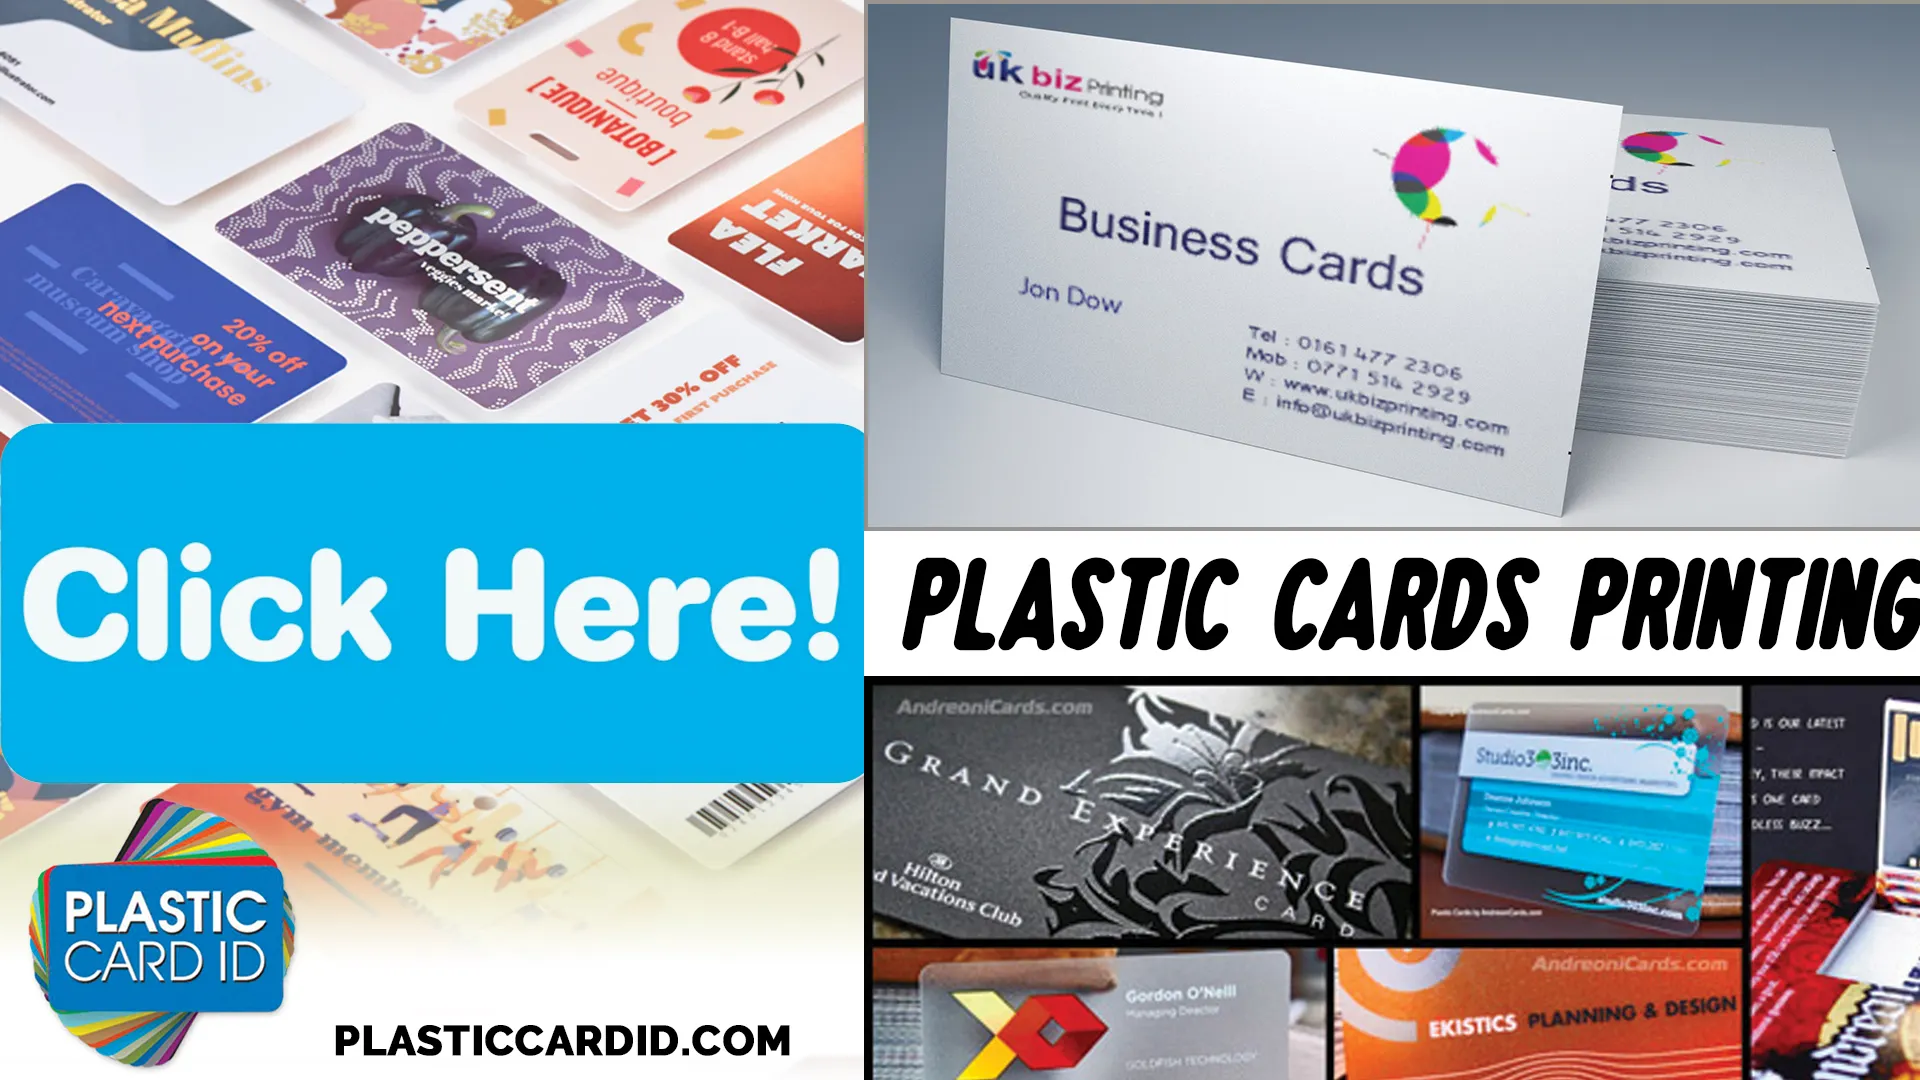 Recycling Plastic Cards: Leading the Charge with Plastic Card ID
